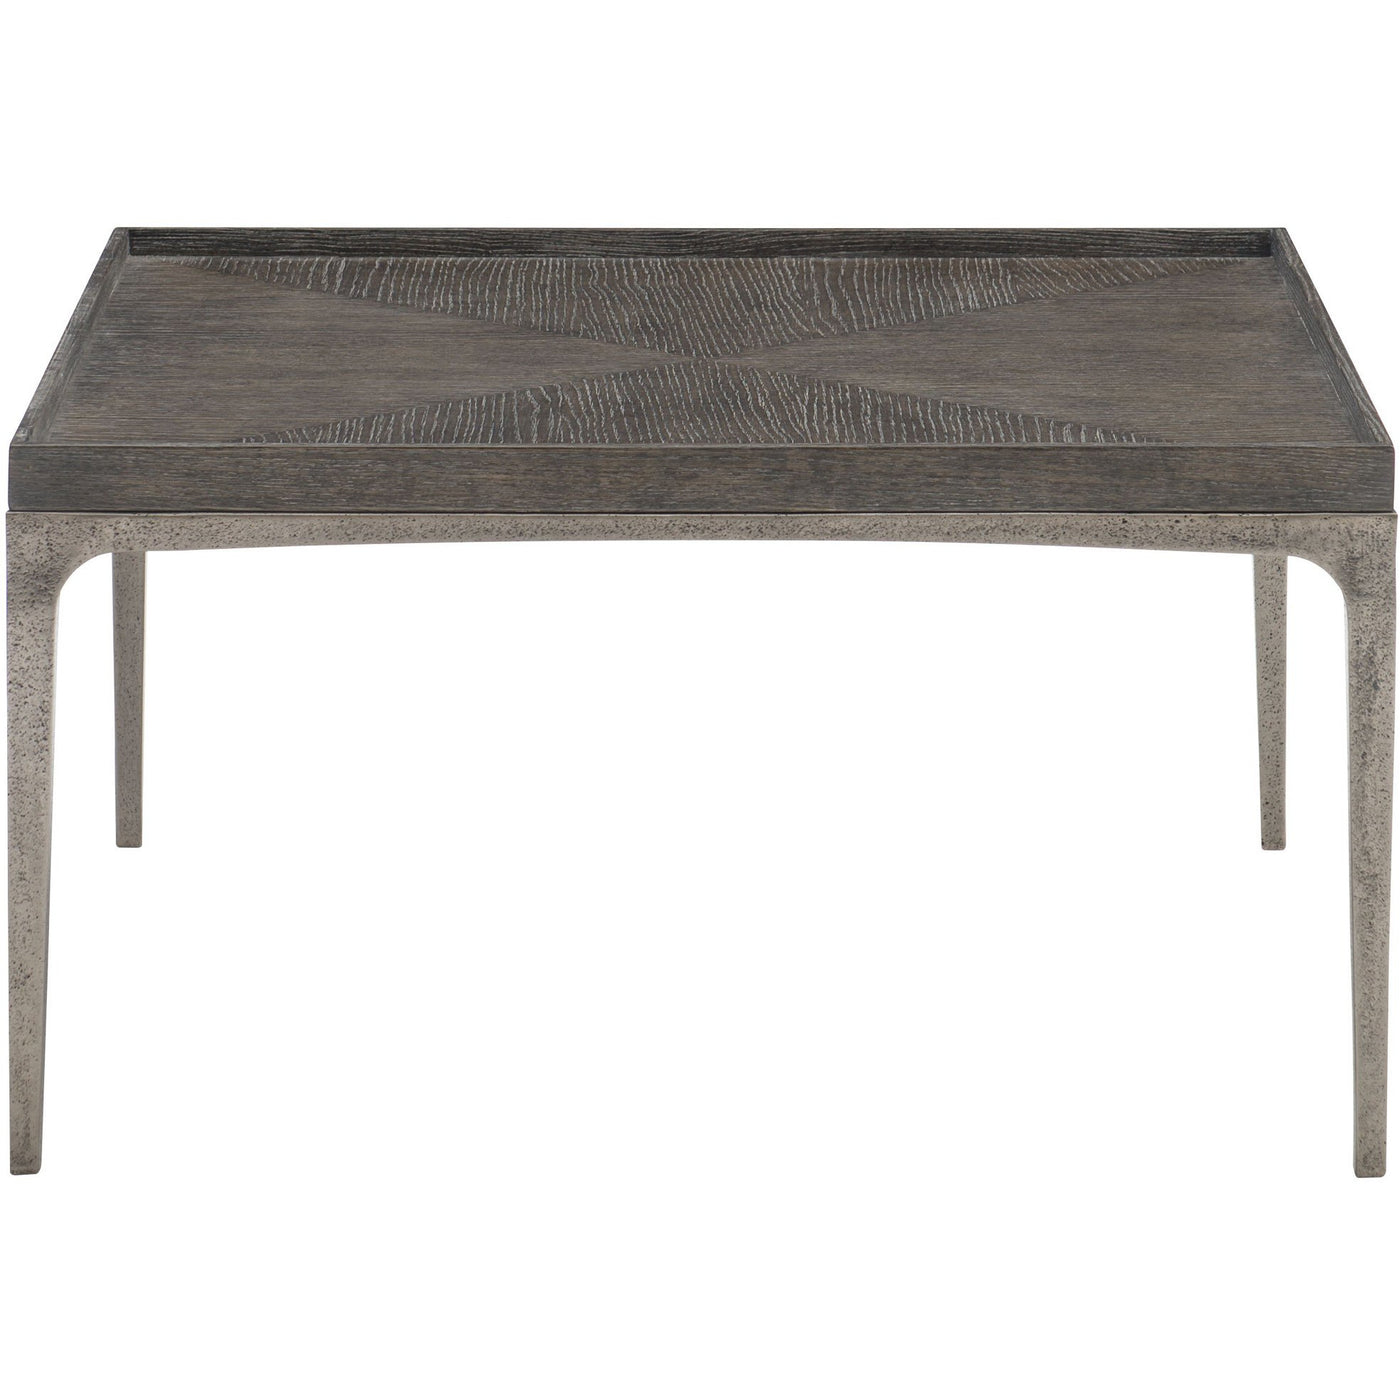 Strata Charcoal Cocktail Table 